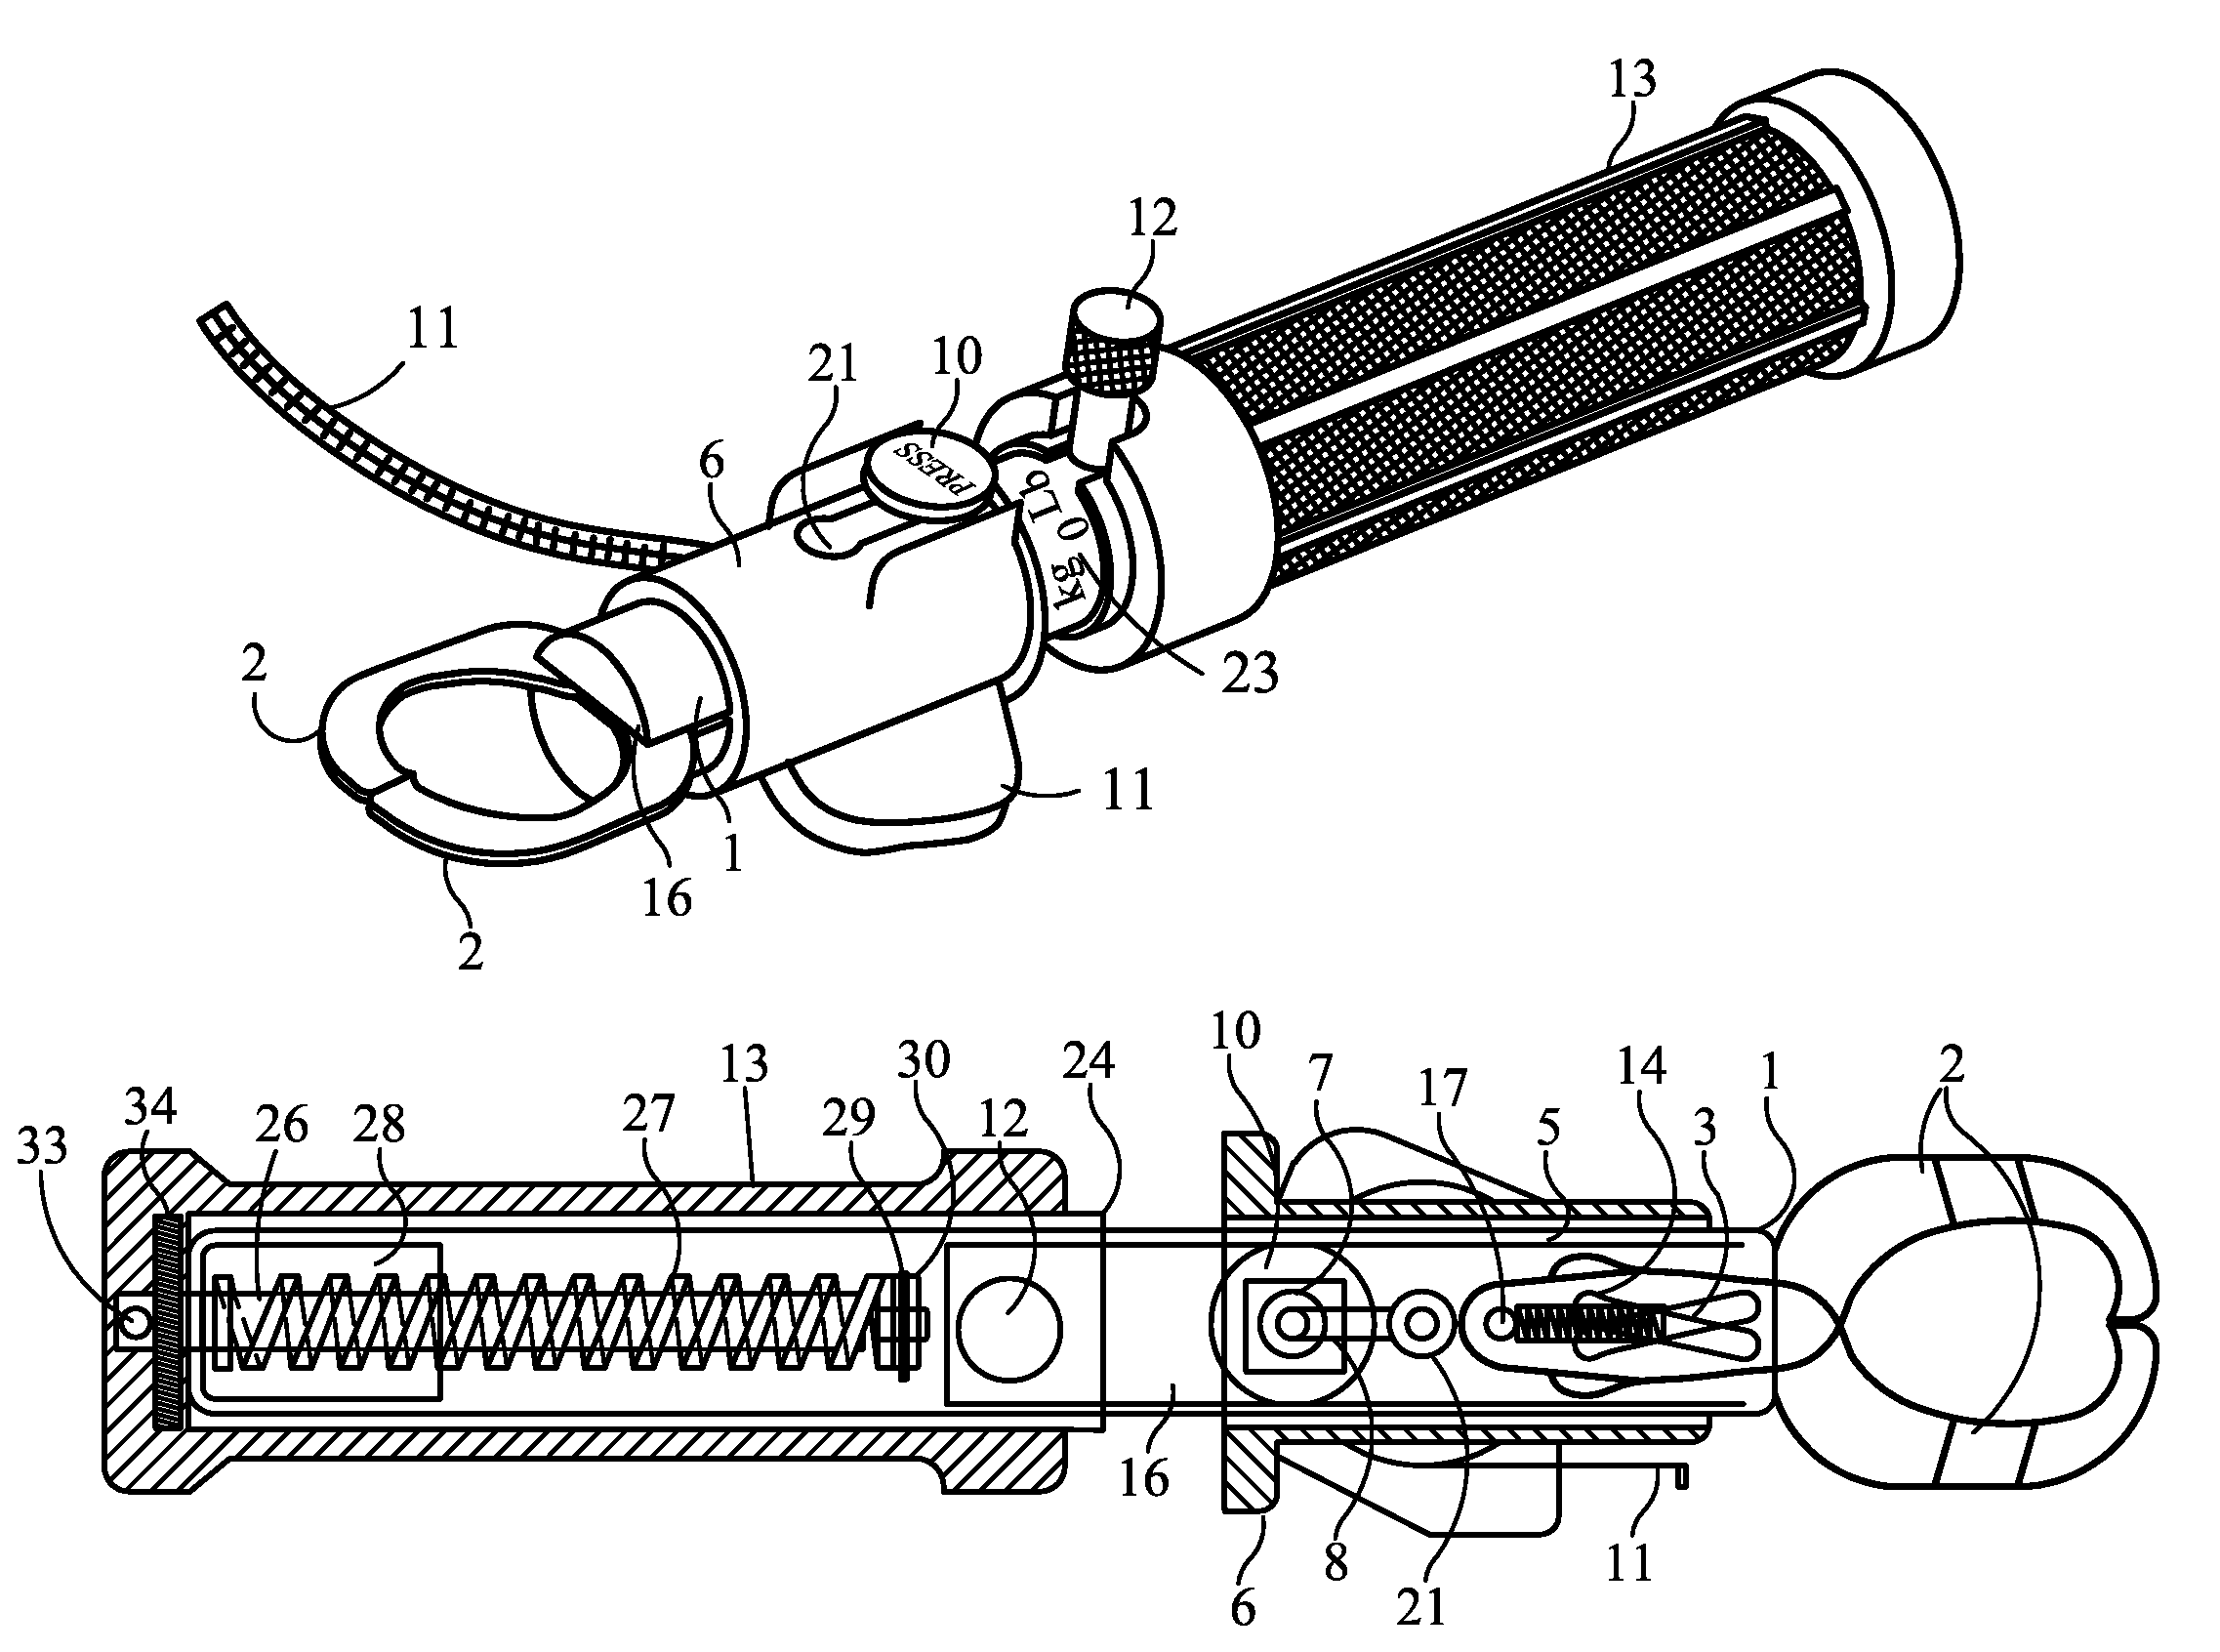 Flash landing and control device